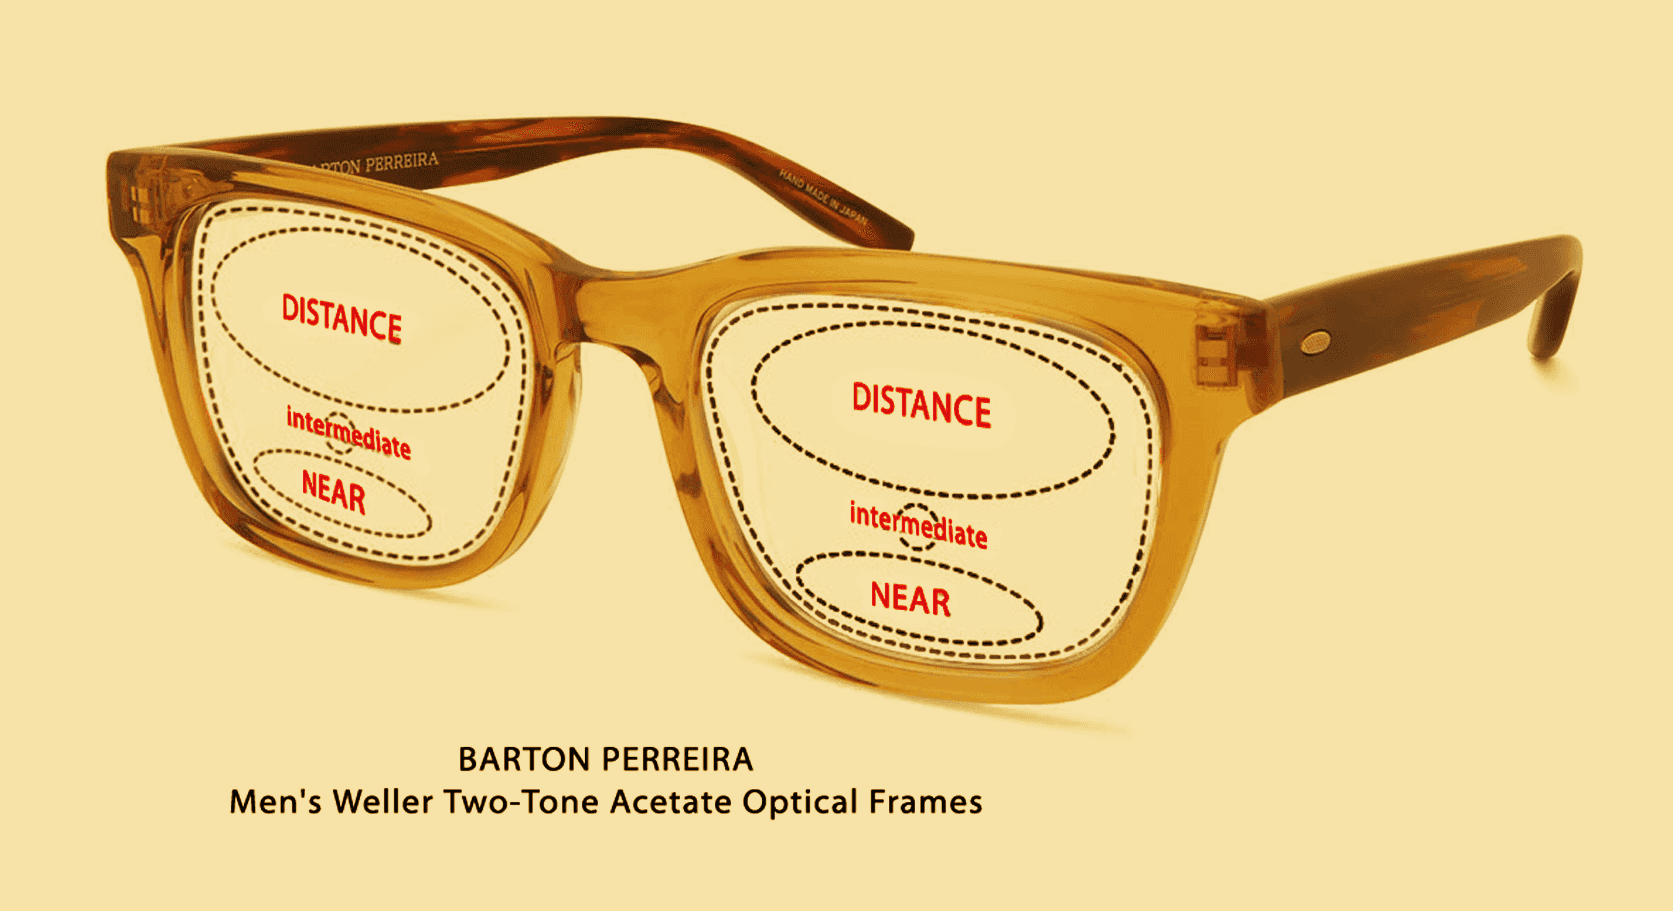 An illustration showing the visual zones in a typical progressive lens